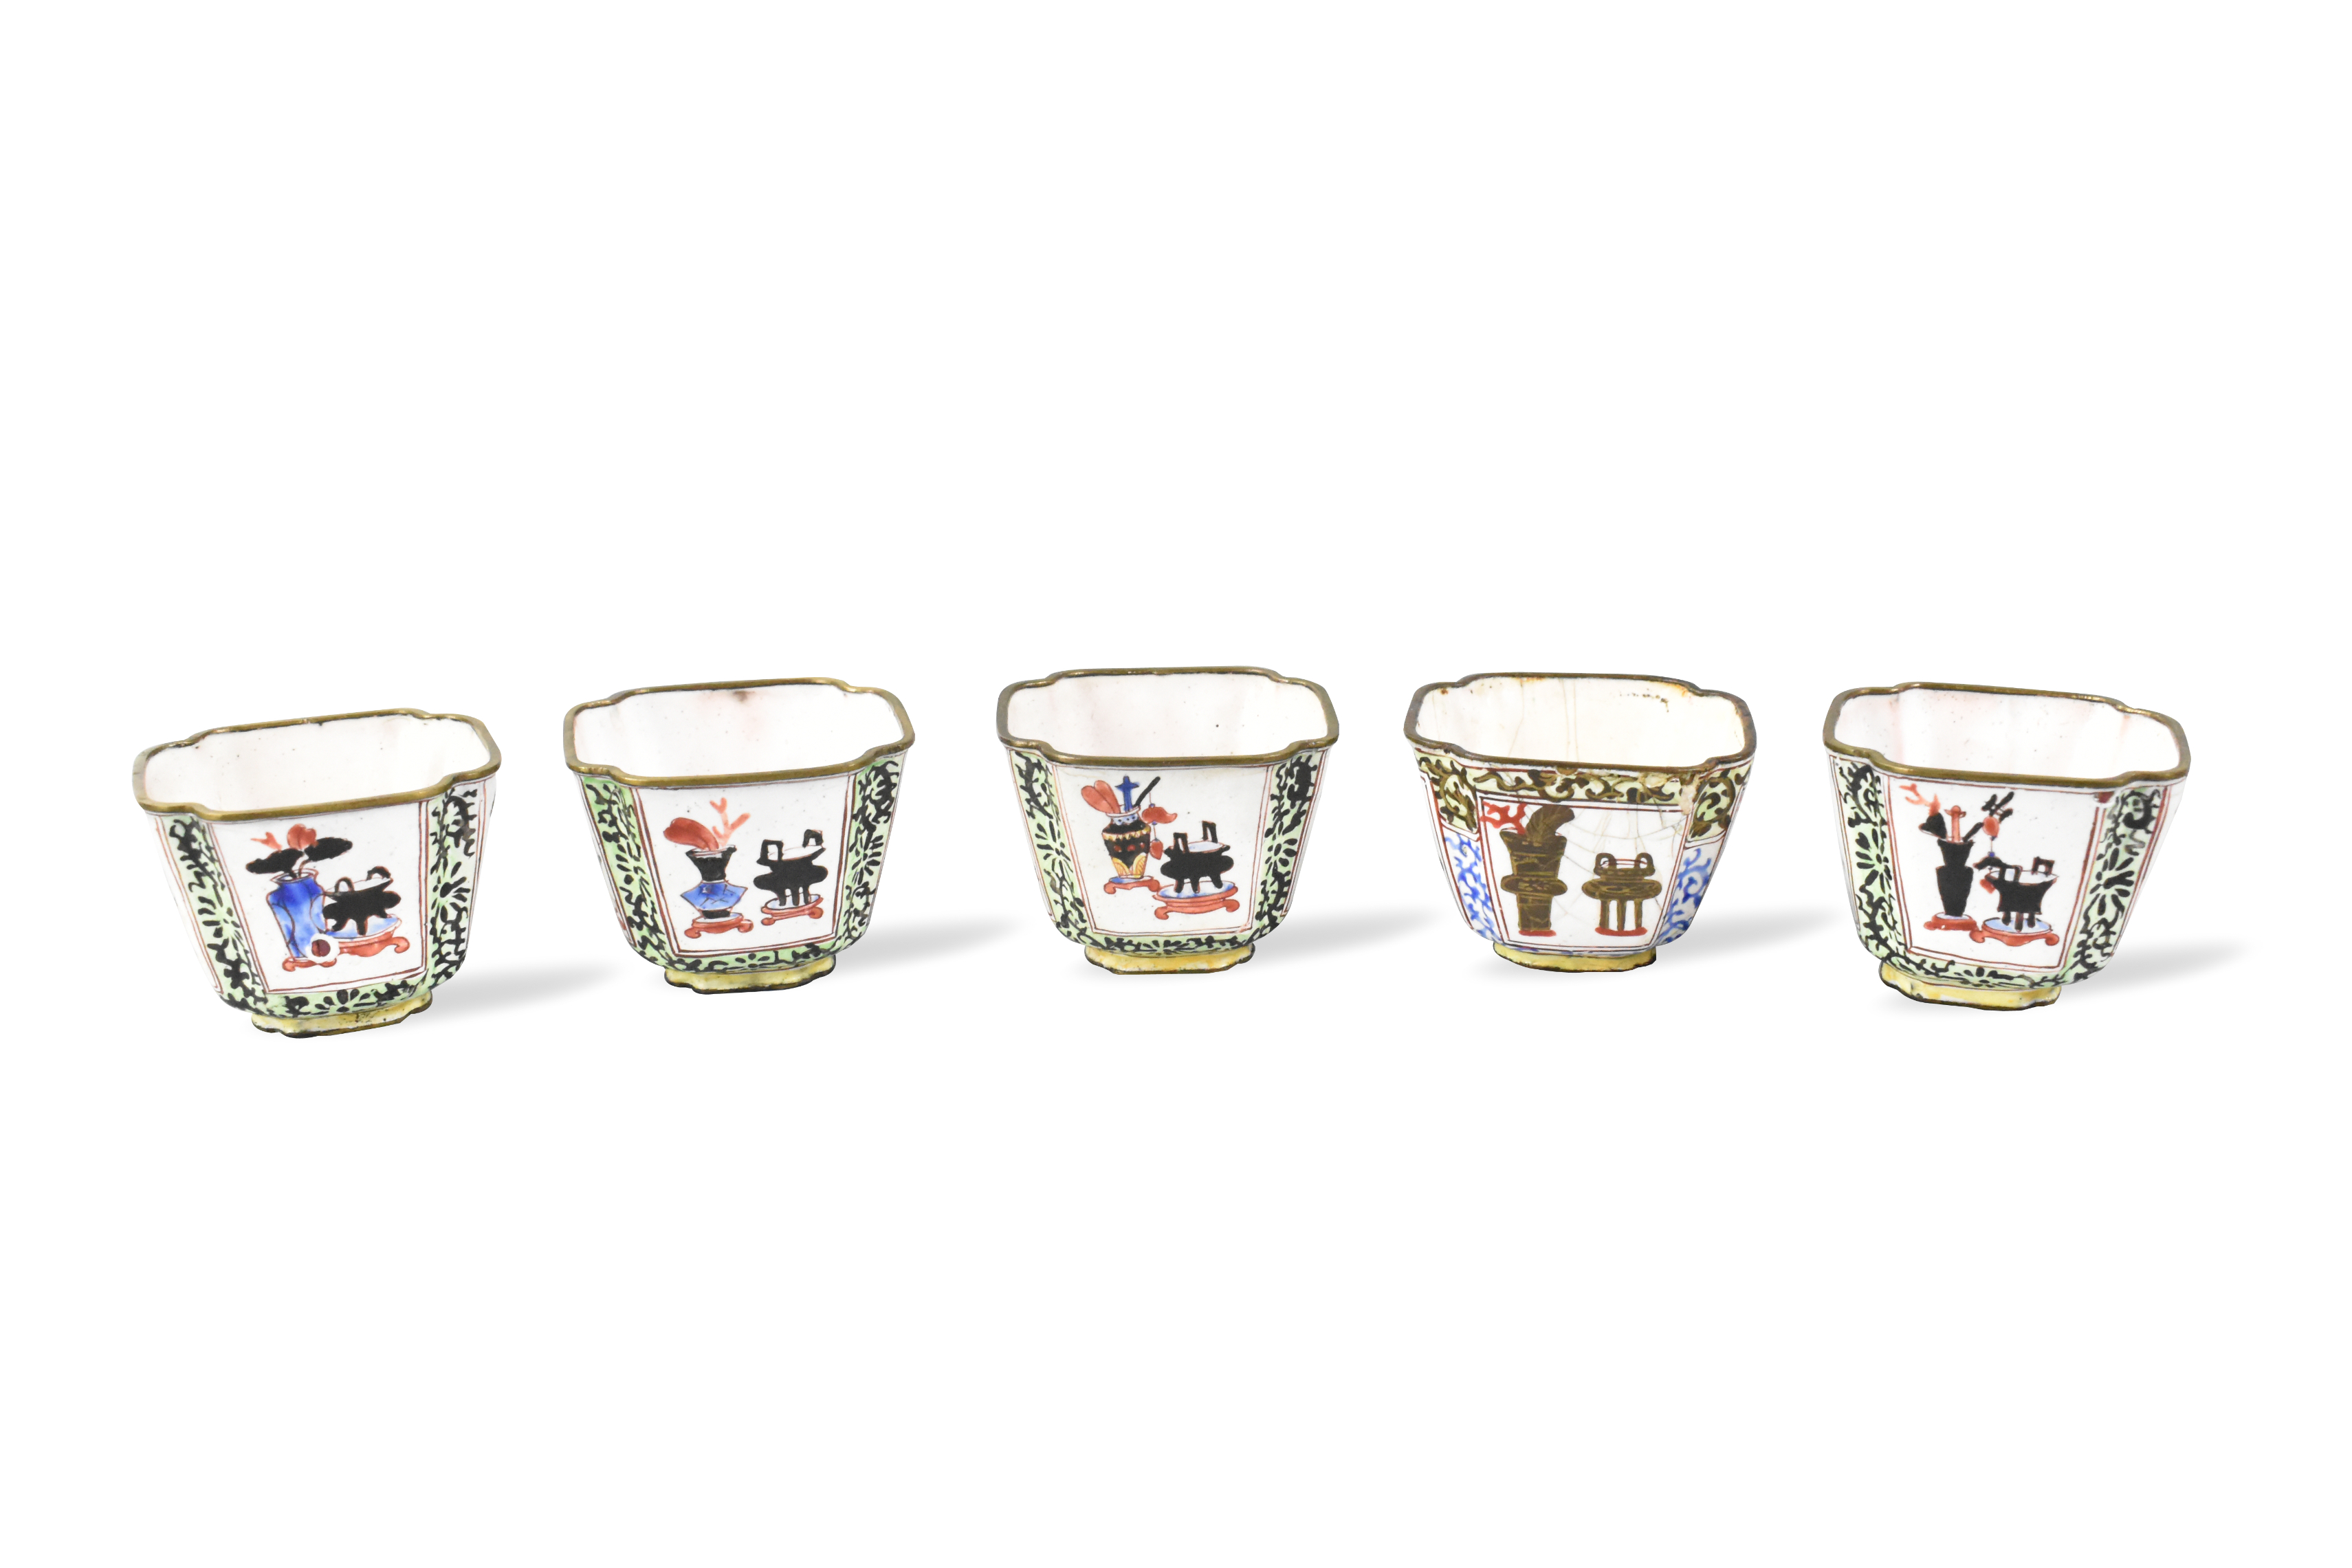 5 SMALL CANTON ENAMELED WINE CUPS,